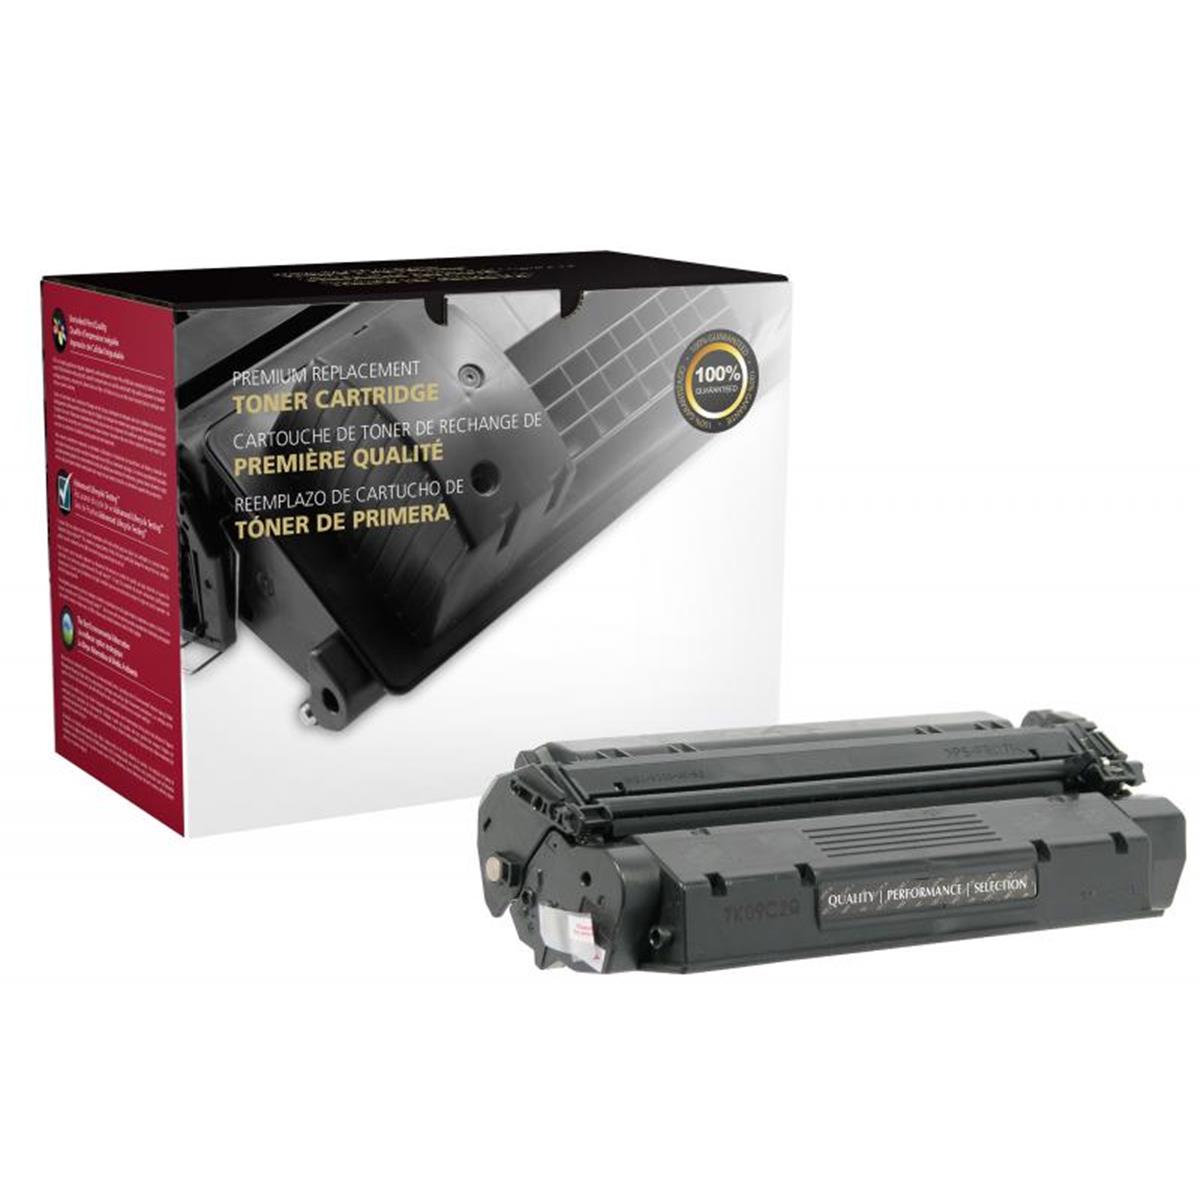 Picture of Canon 200039 Universal Toner Cartridge for Canon 7833A001AA & 8955A001AA-S35 & FX8